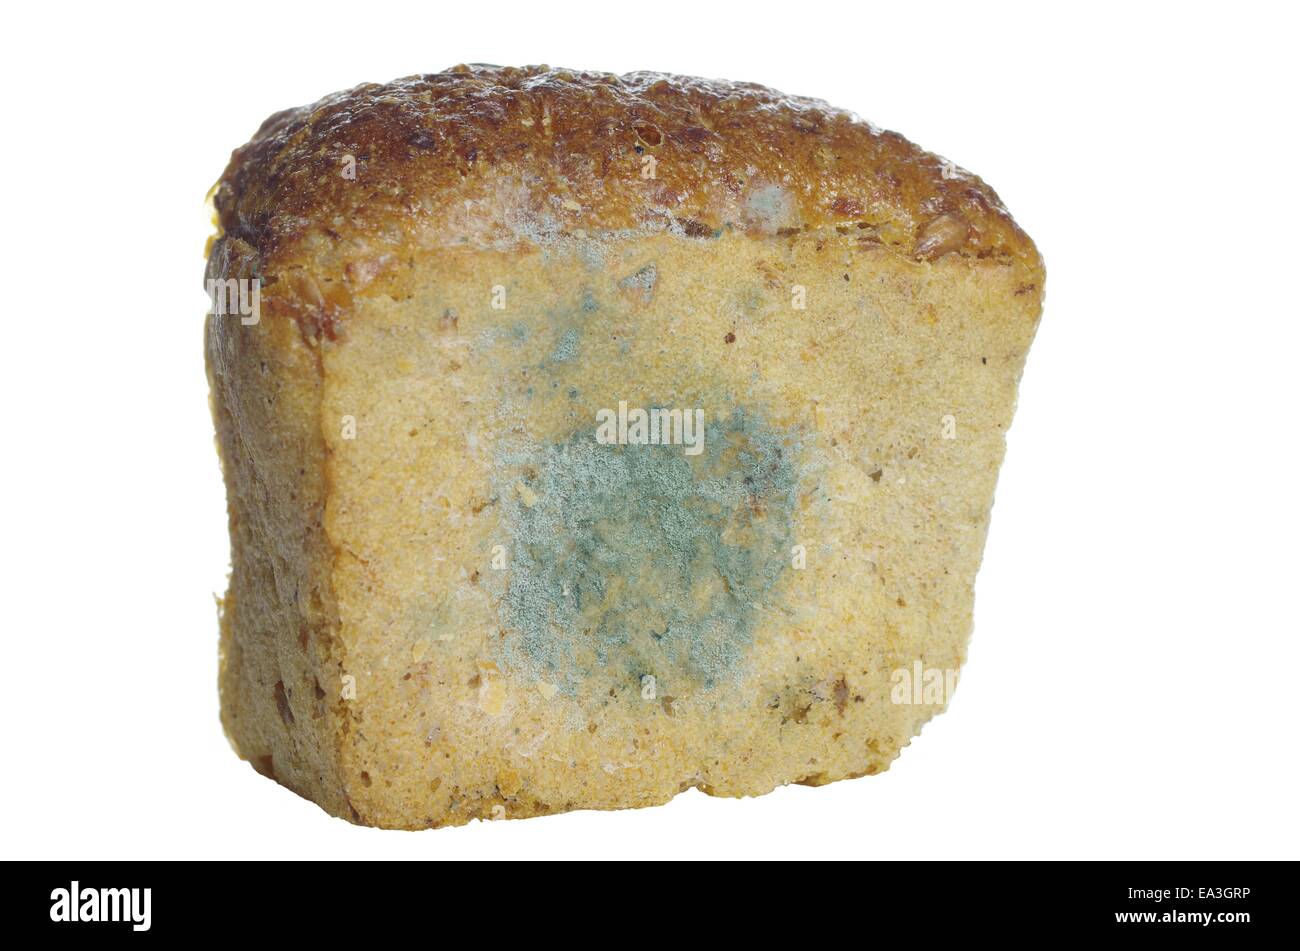 Bread with mould, composite image - Stock Image - F025/0148